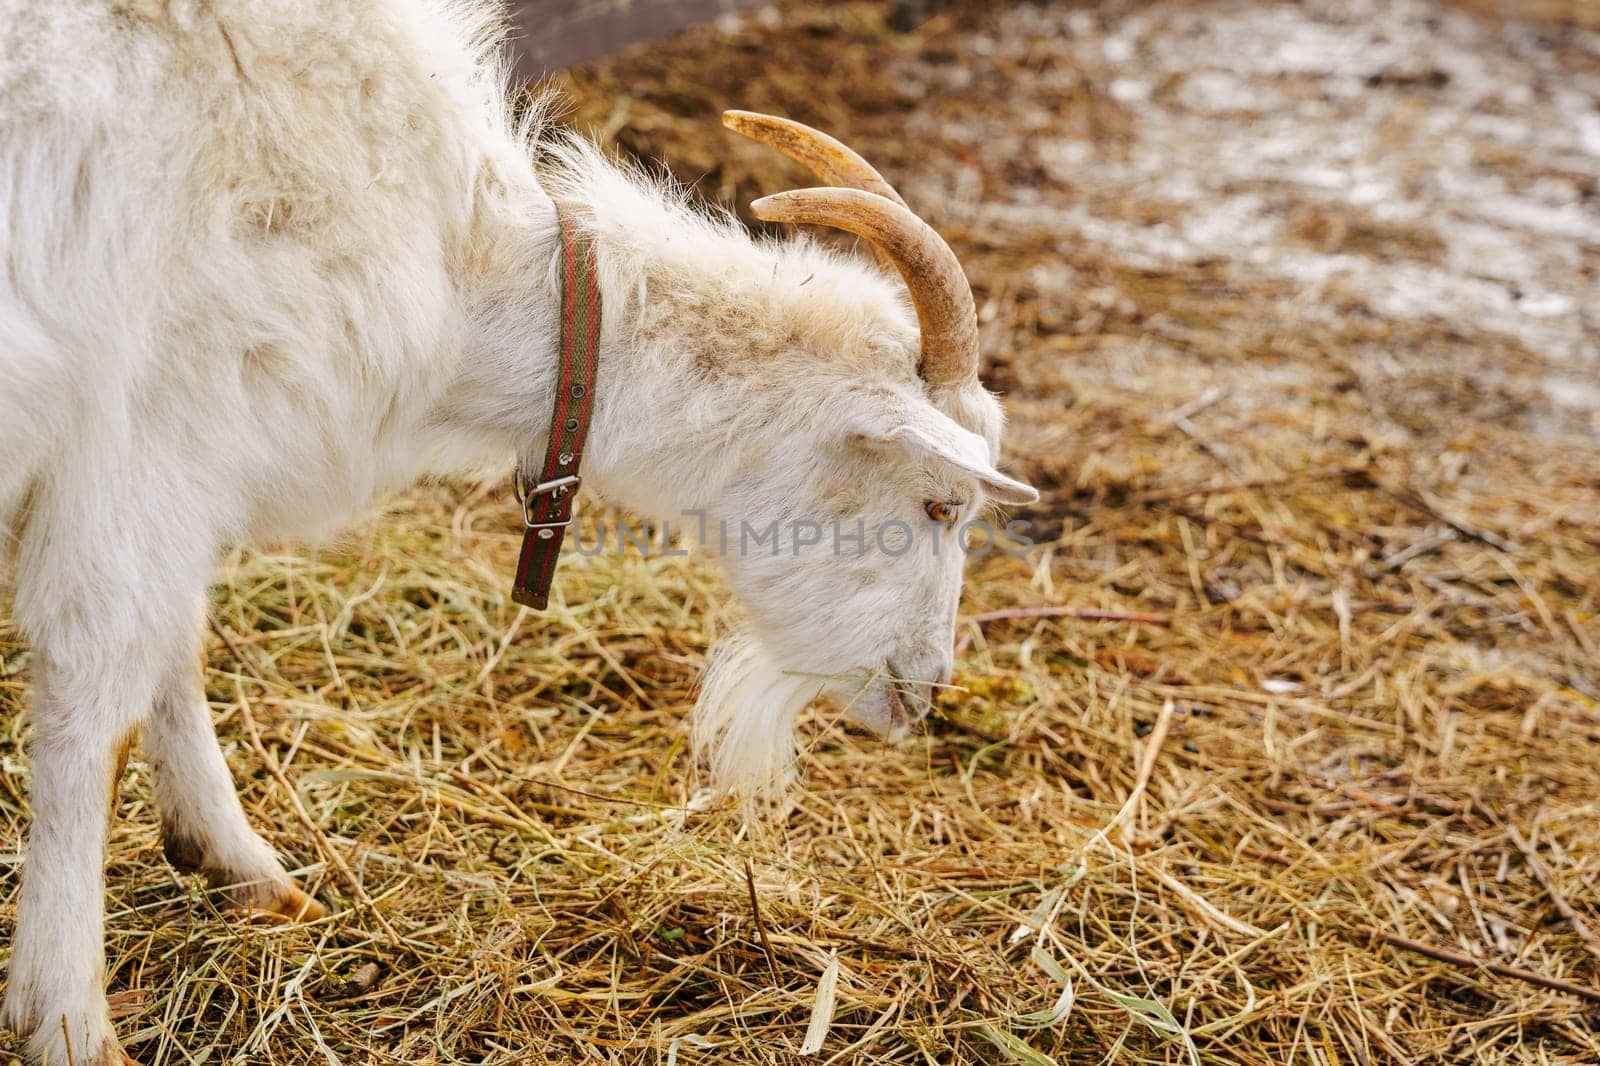 Goat stands gracefully on a tall pile of golden hay, surveying its surroundings with curiosity and poise. by darksoul72